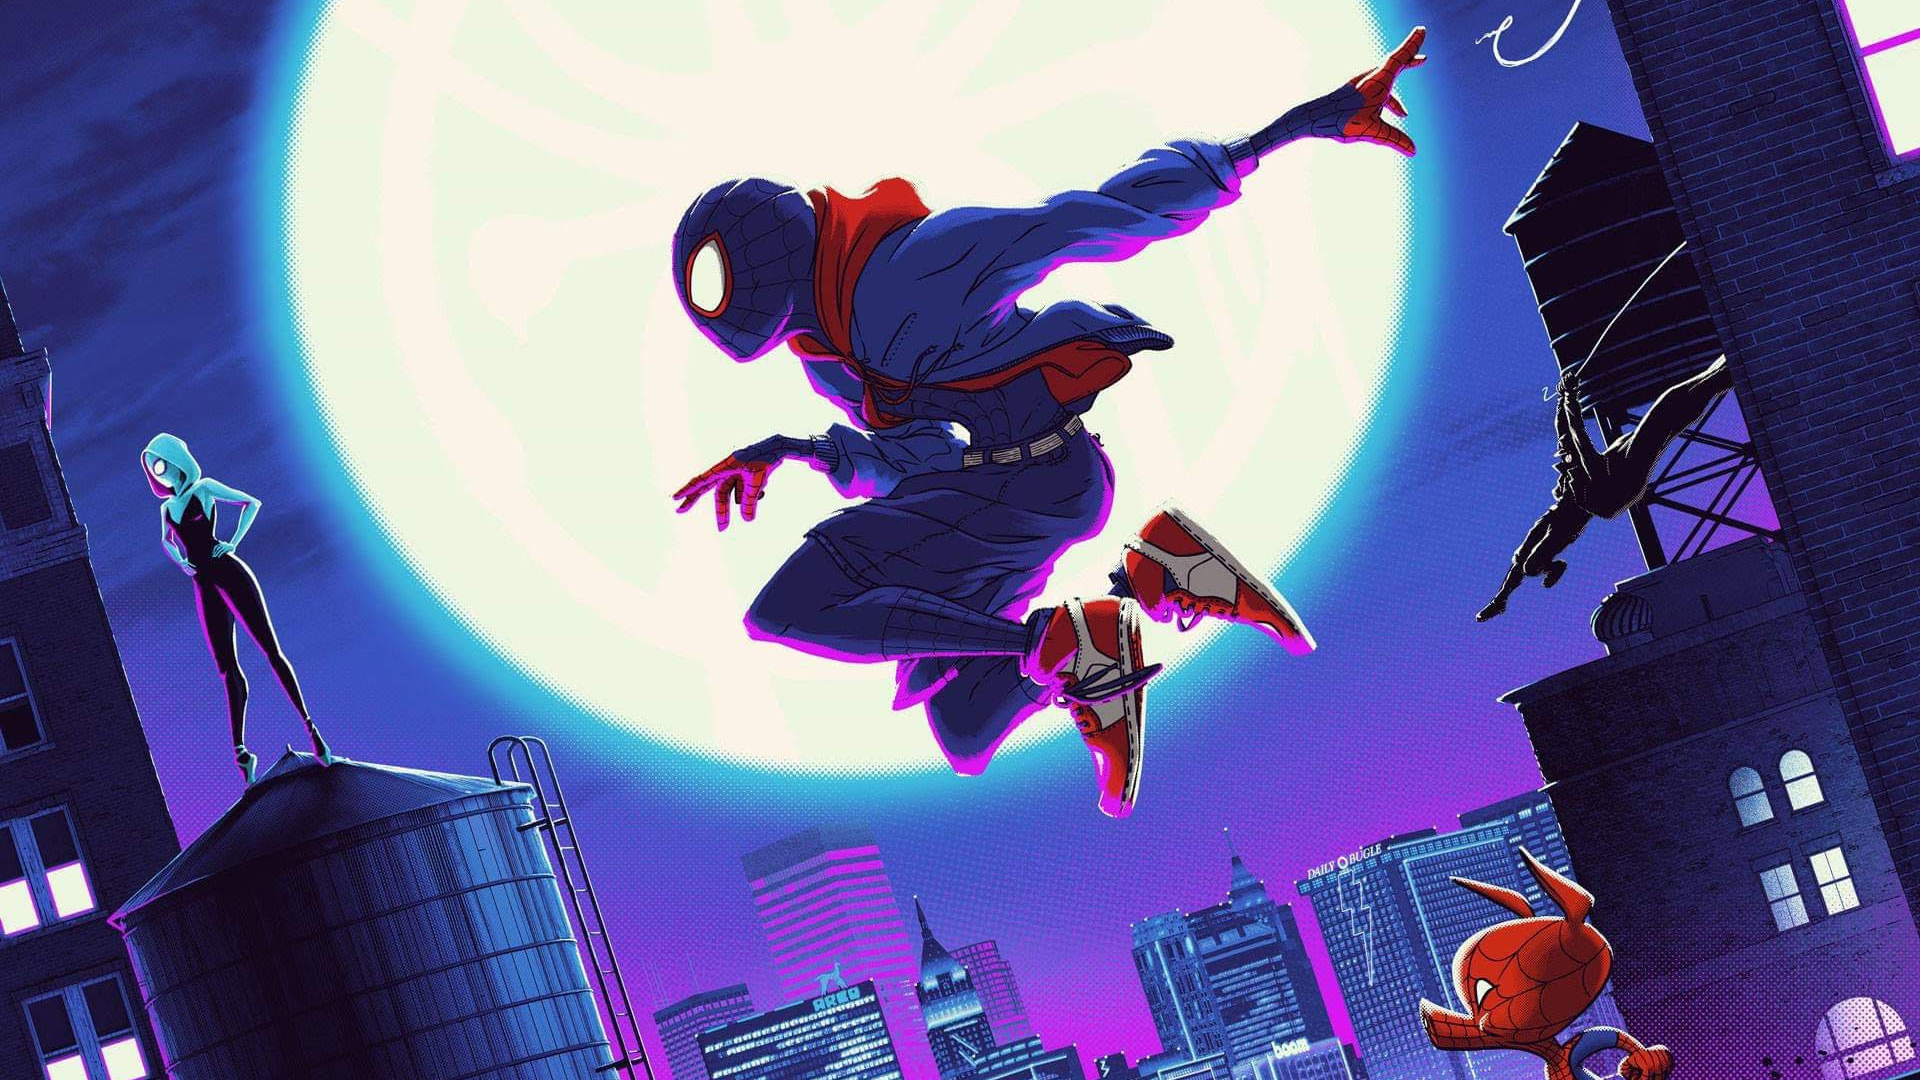 SpiderMan Into The Spider Verse Cool Art, HD Superheroes, 4k Wallpapers